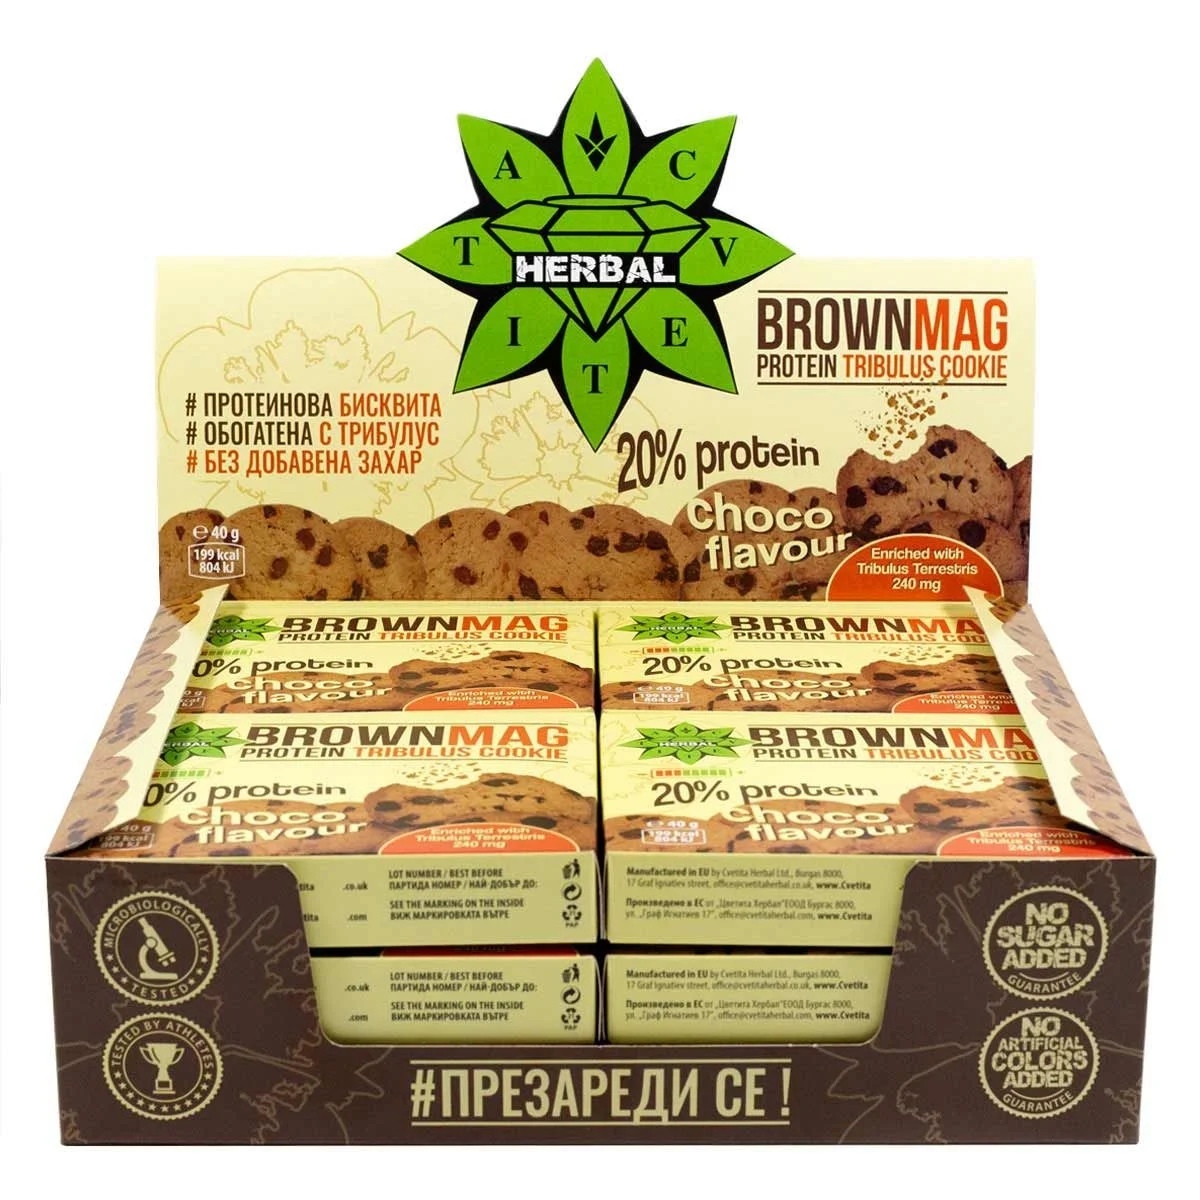 Cvetita Herbal BrownMag Protein cookie with cocoa nibs and Tribulus - 12 pcs